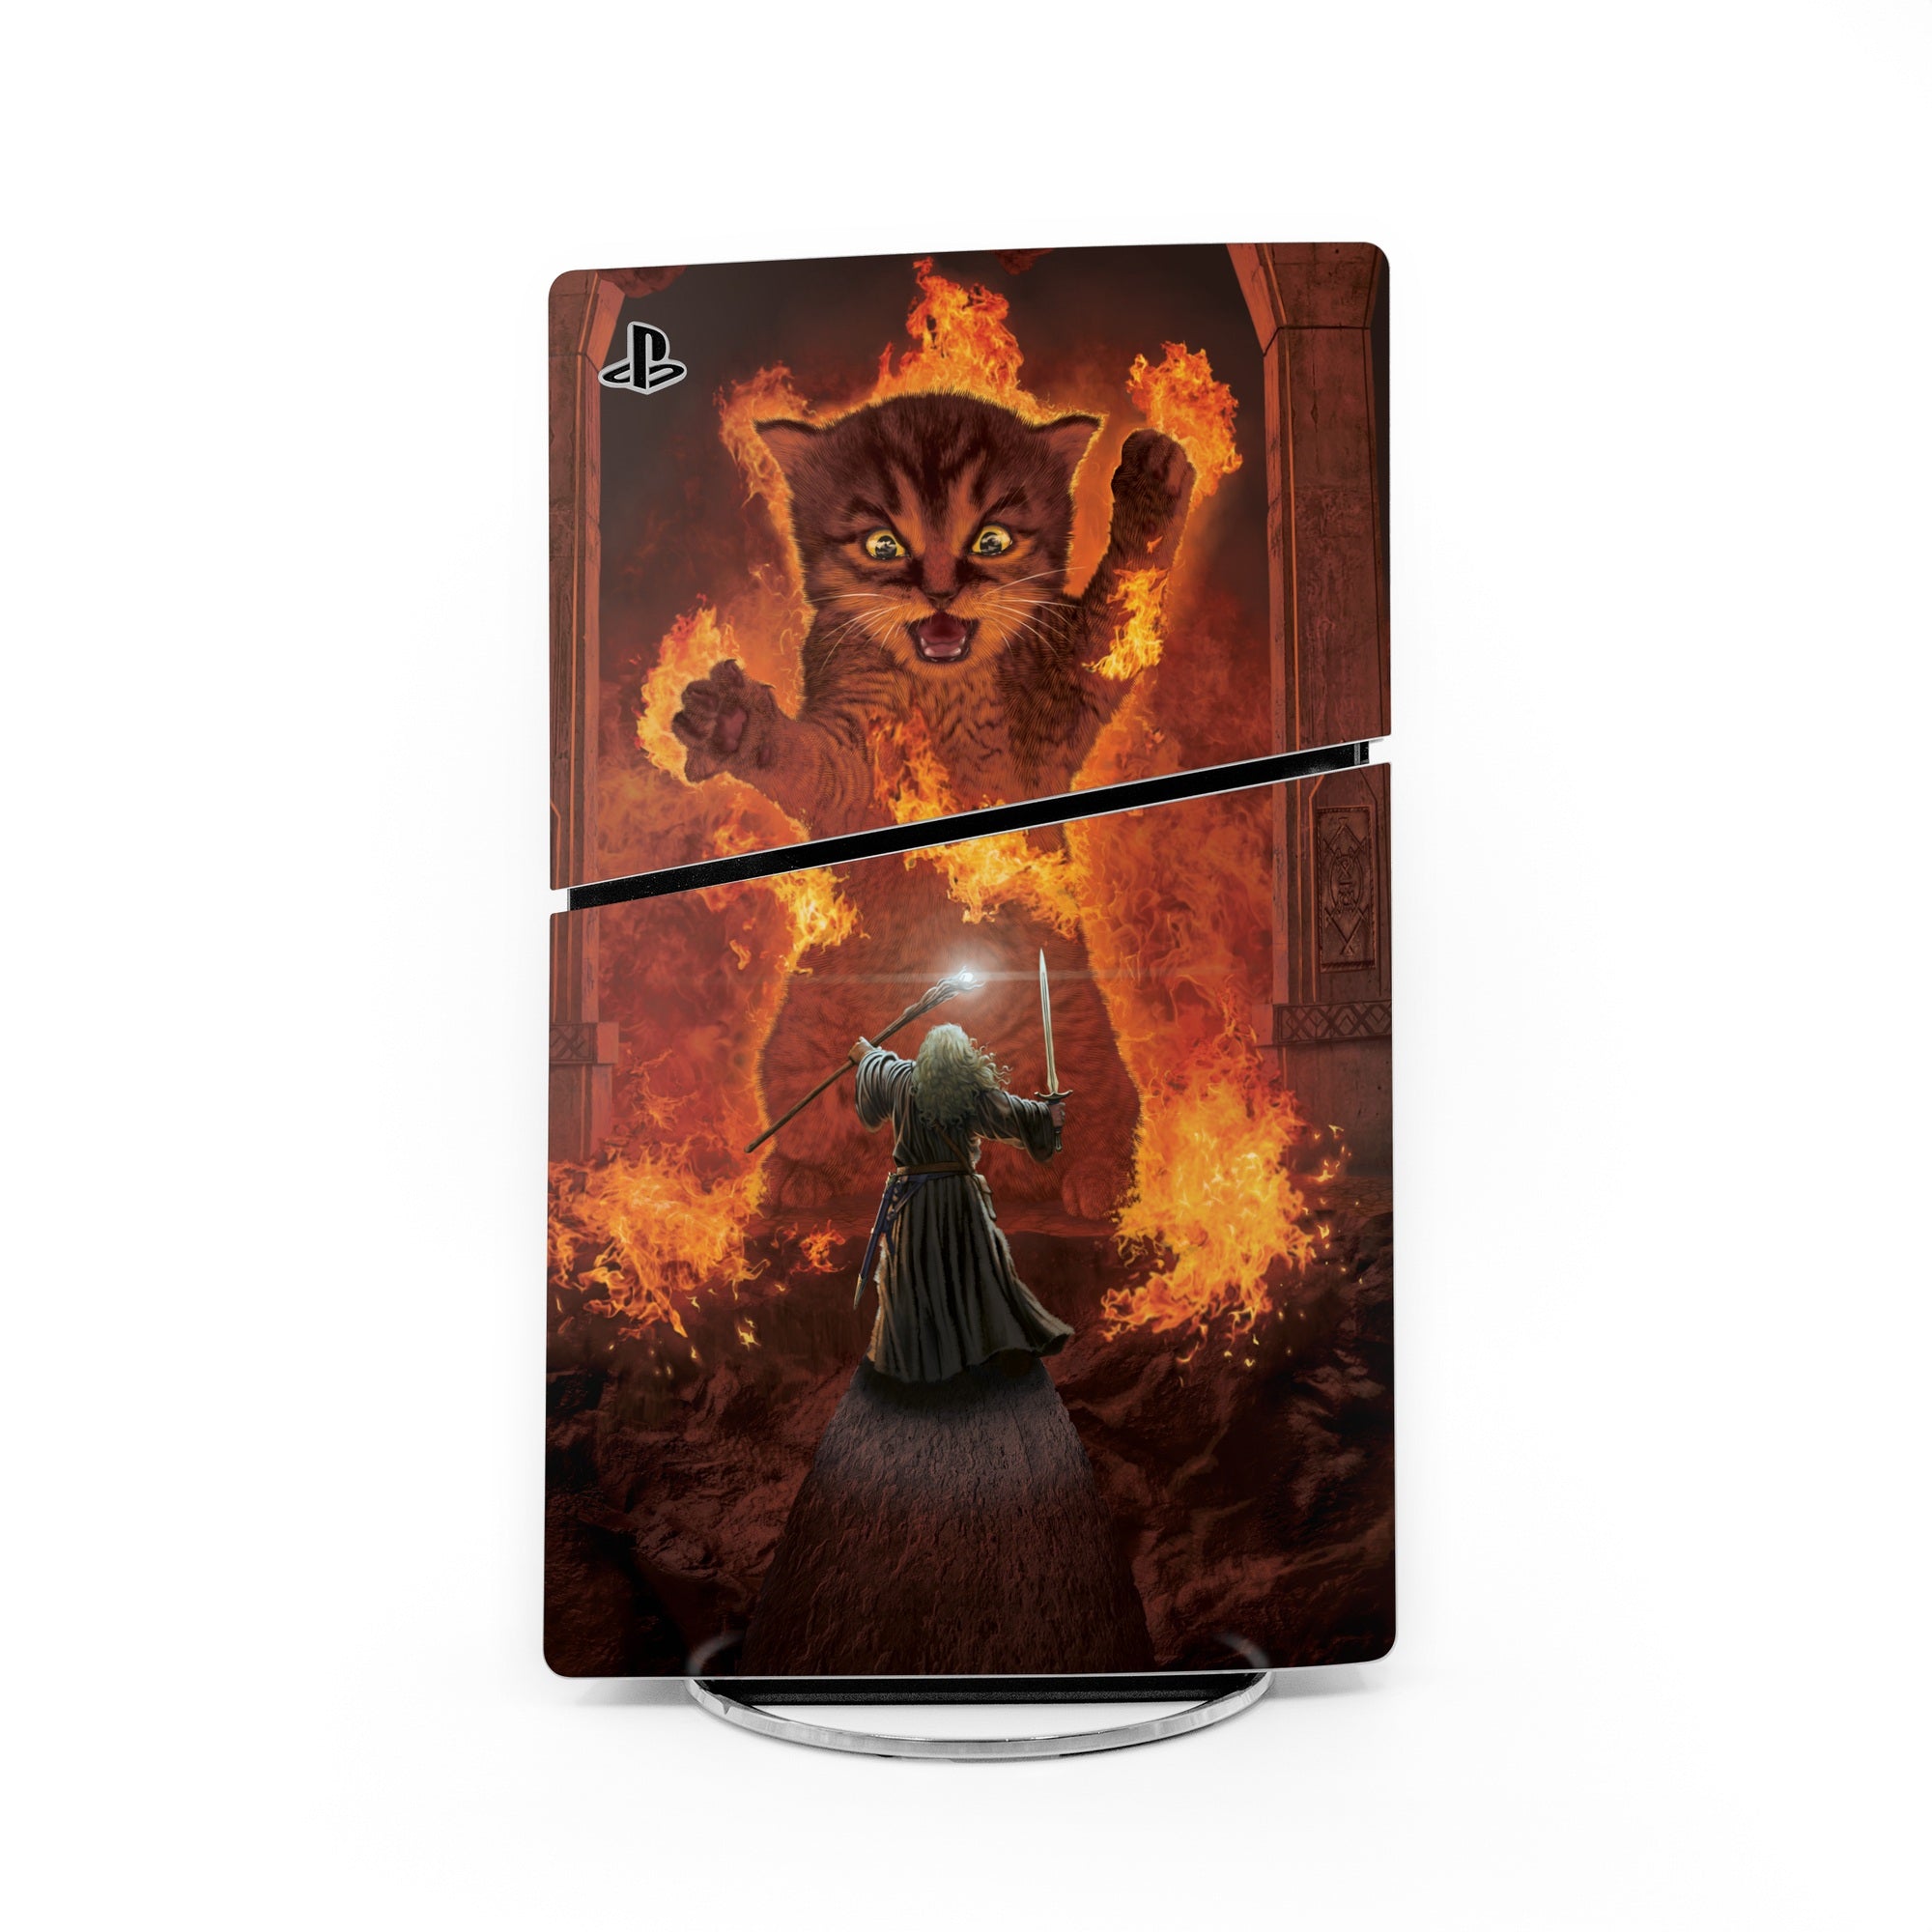 You Shall Not Pass - Sony PS5 Slim Skin